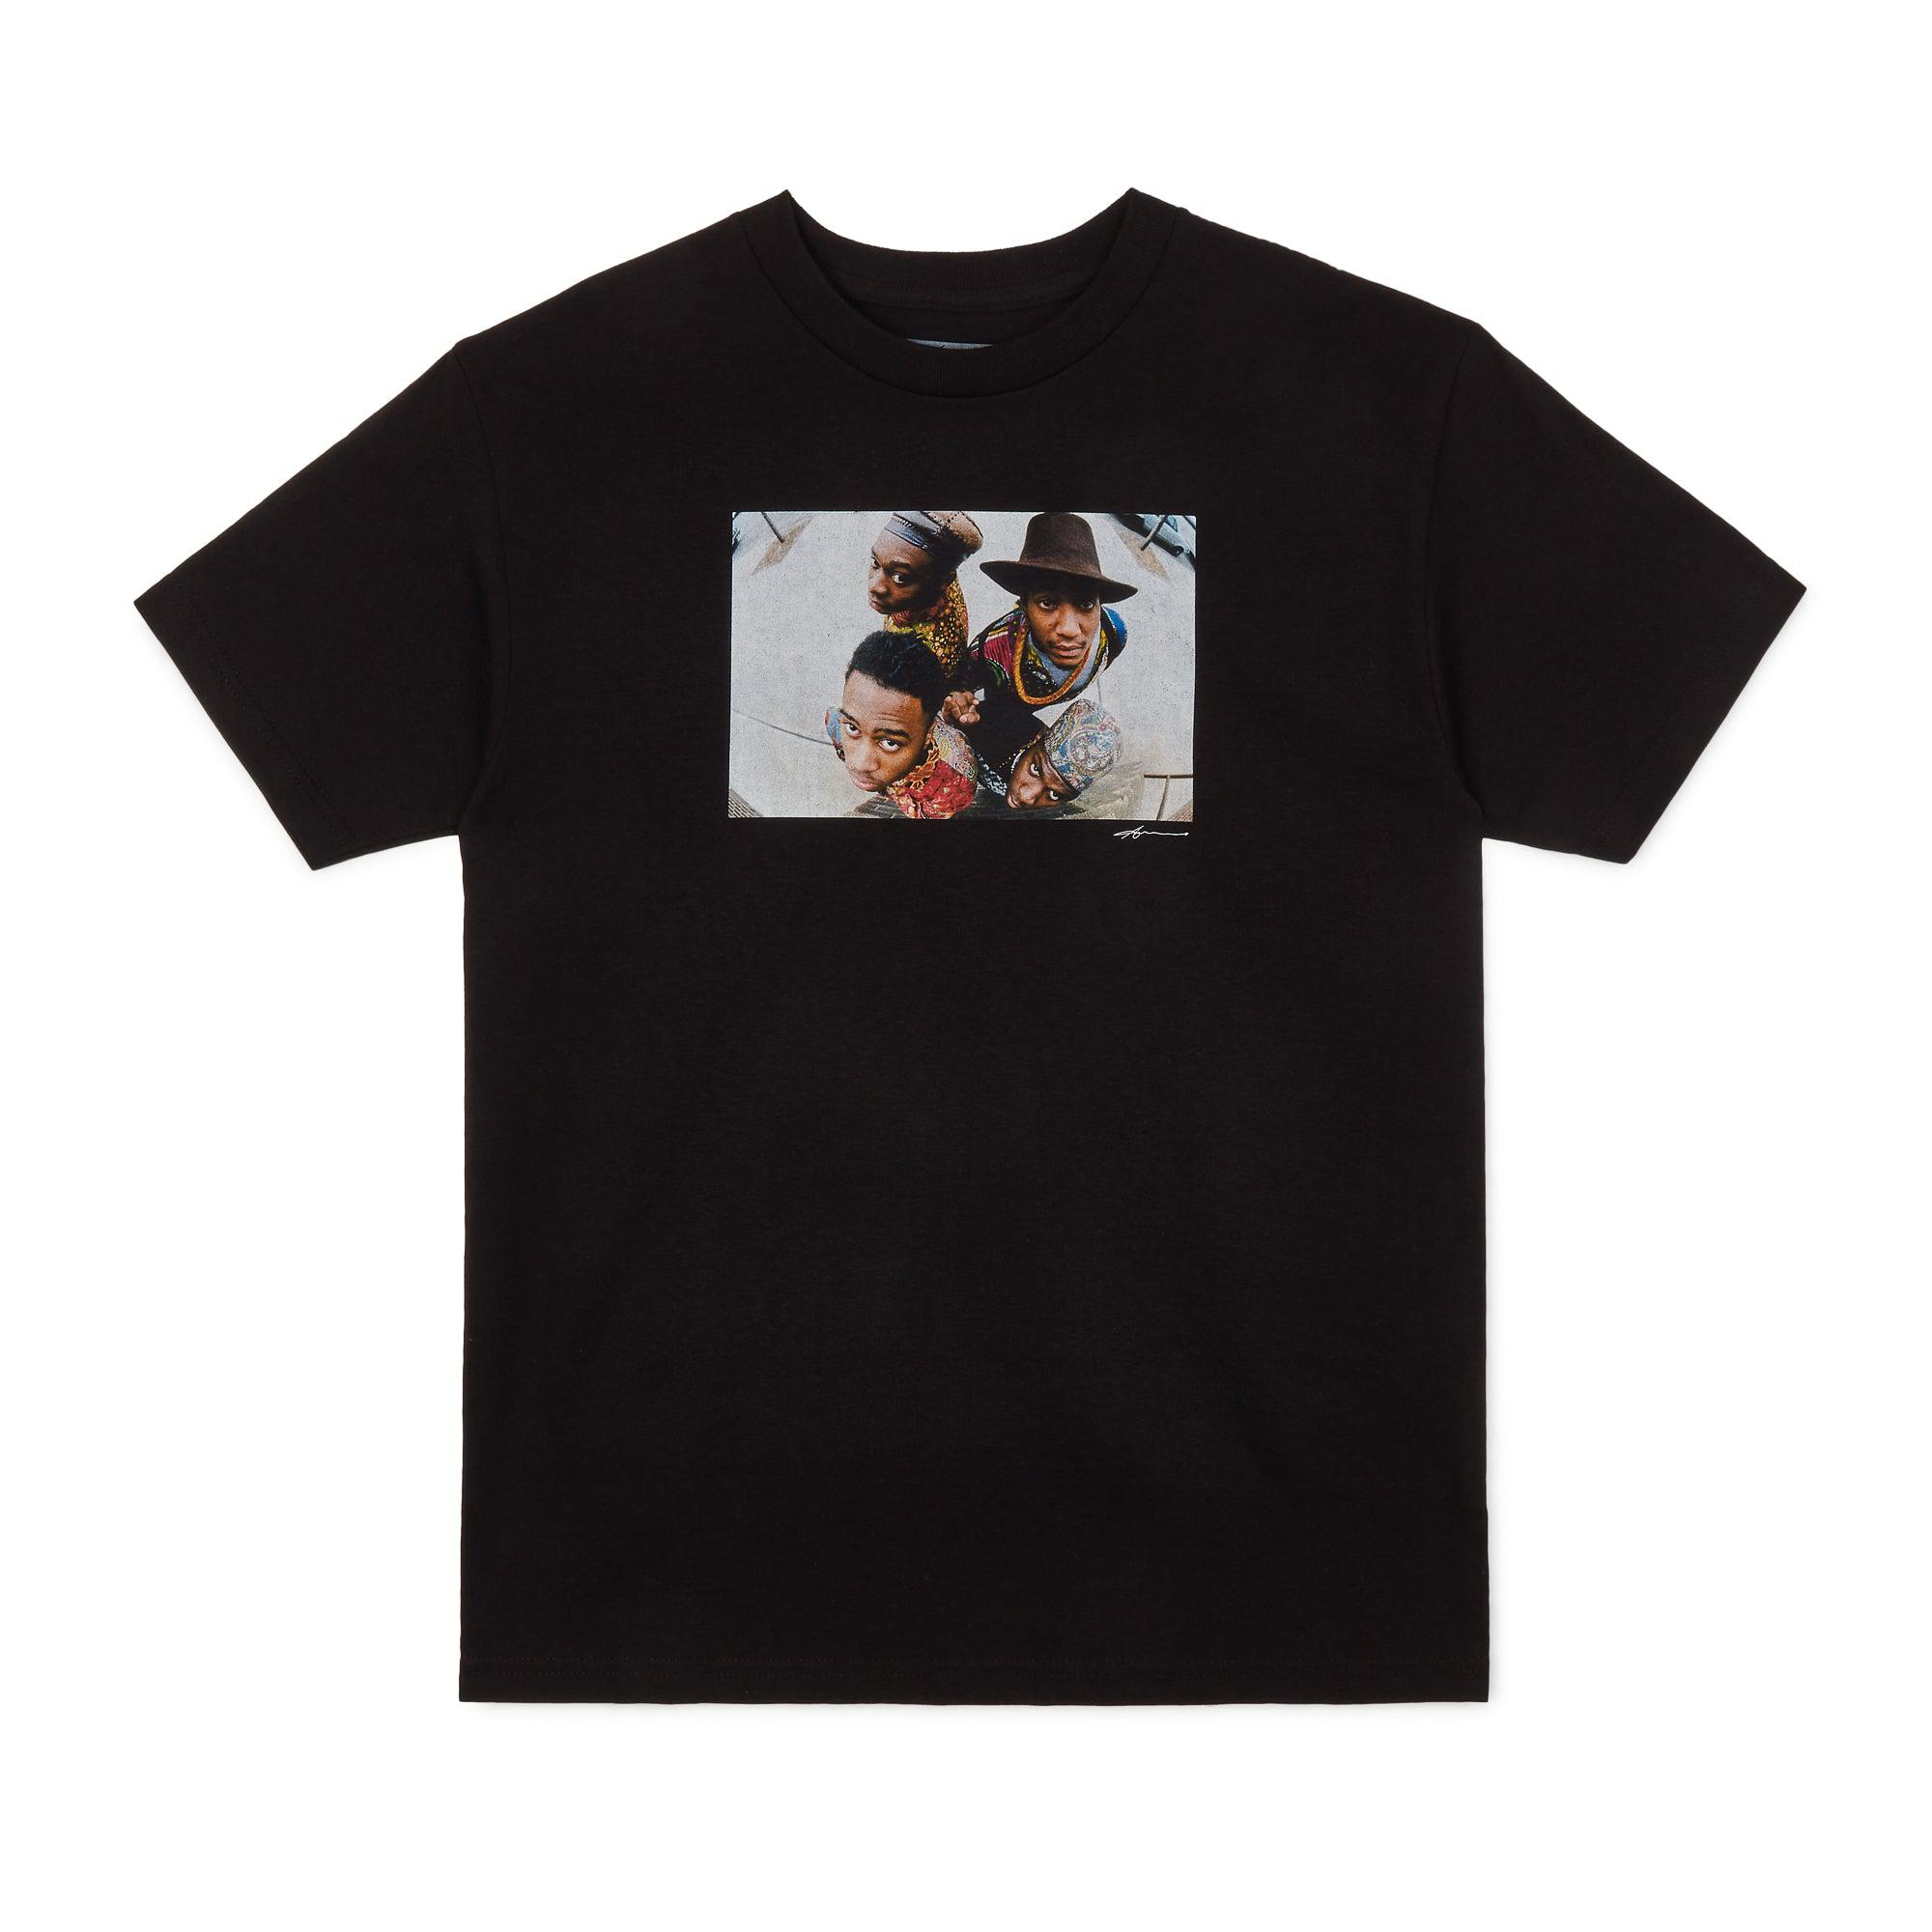 Ari Marcopoulos A Tribe Called Quest New York T-Shirt (Black) by ARI MARCOPOULOS